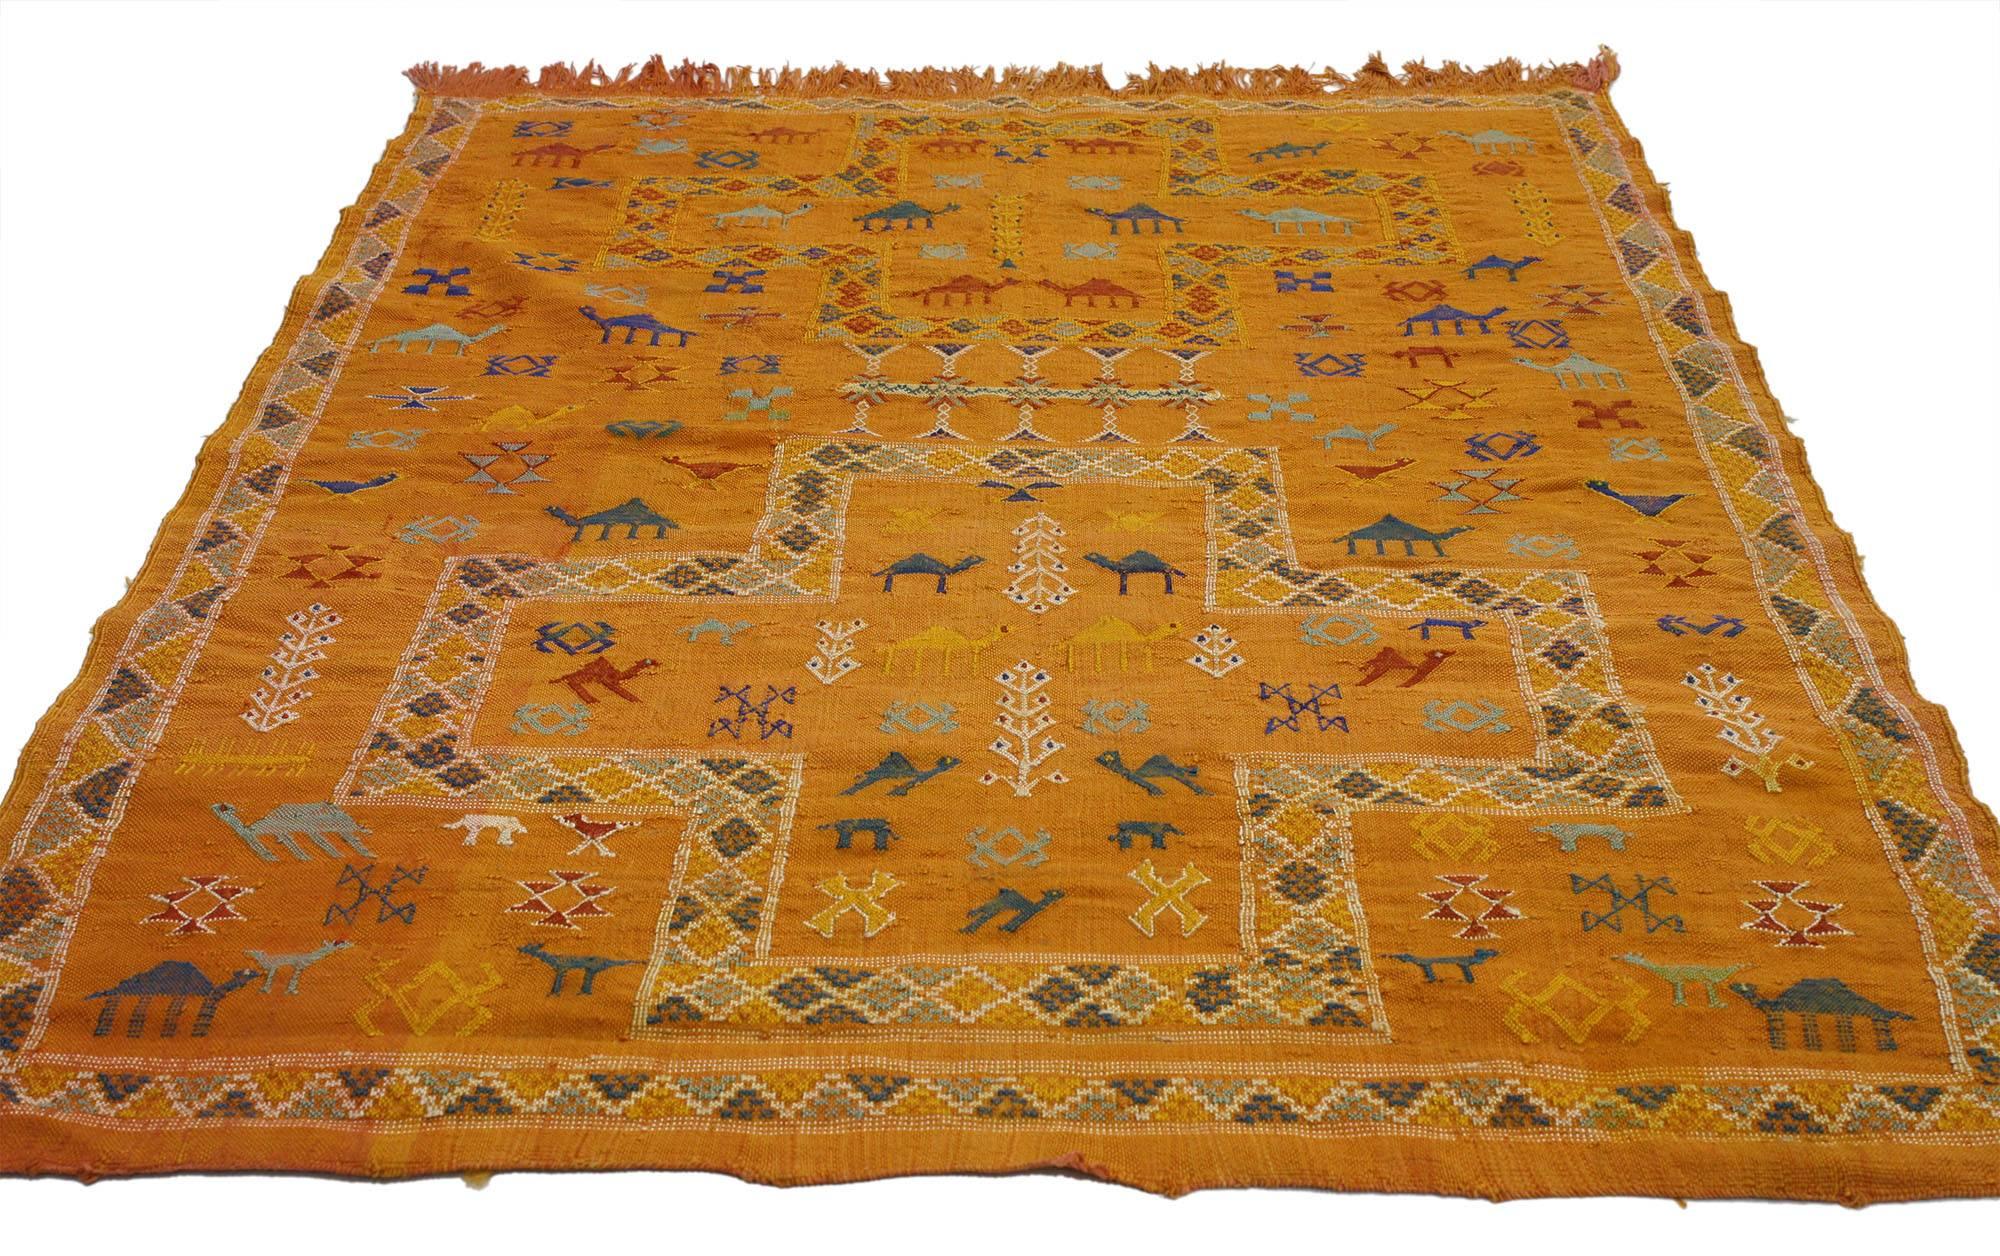 76988, vintage Turkish Kilim rug with tribal style, small flat-weave. This handwoven wool vintage Turkish Kilim rug features an array of geometric tribal motifs, including camels and the three of life. Intricate, colorful and full of ancient